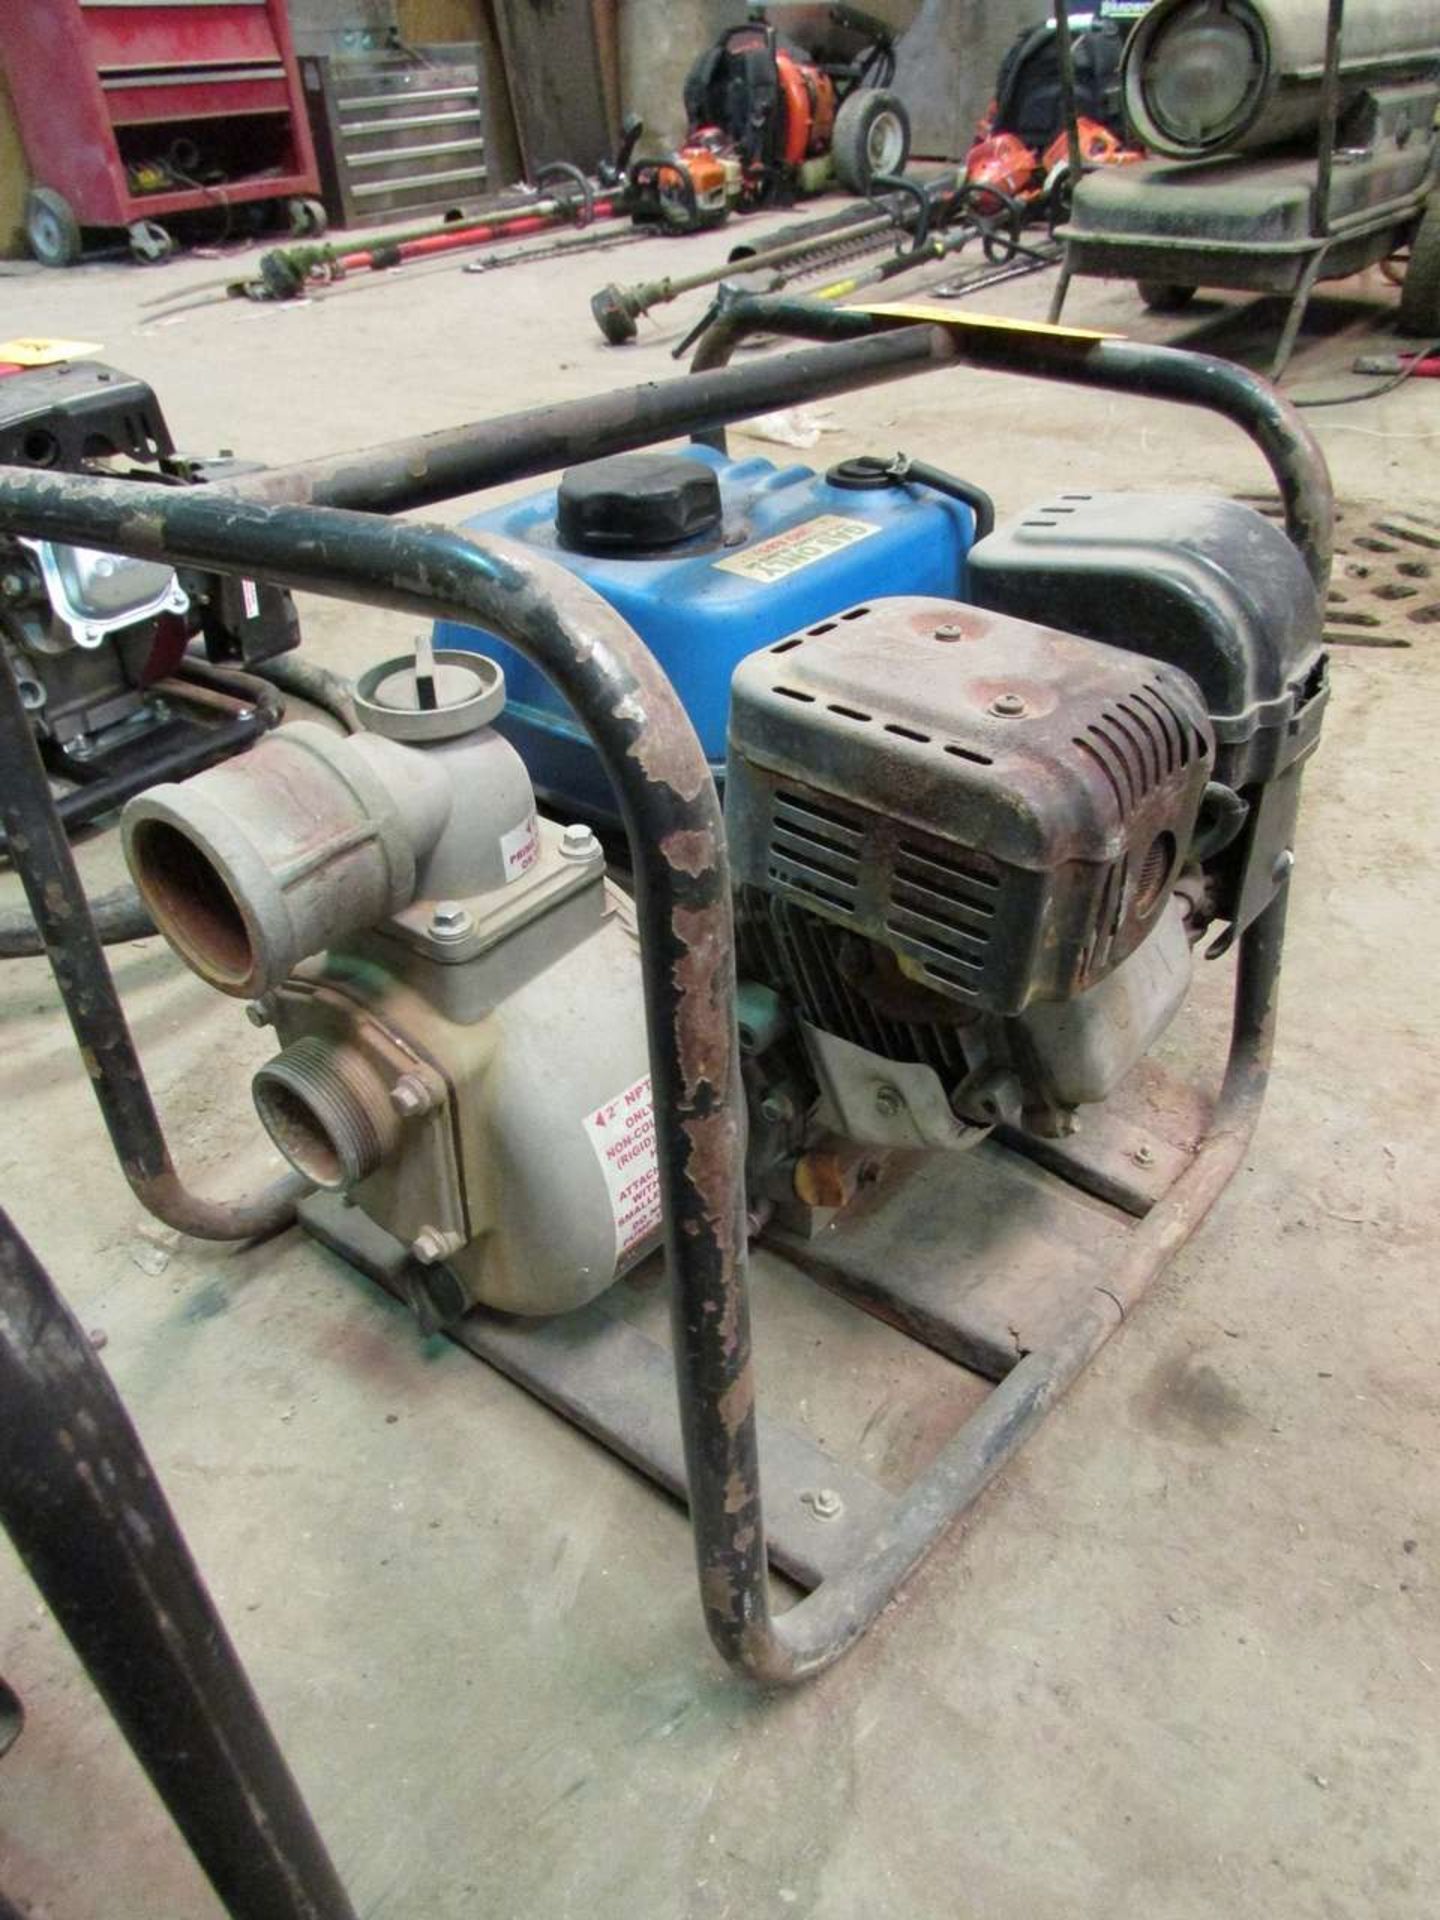 Pacific Hydrostar 62579 Gas Powered 2" Water Pump - Image 3 of 5